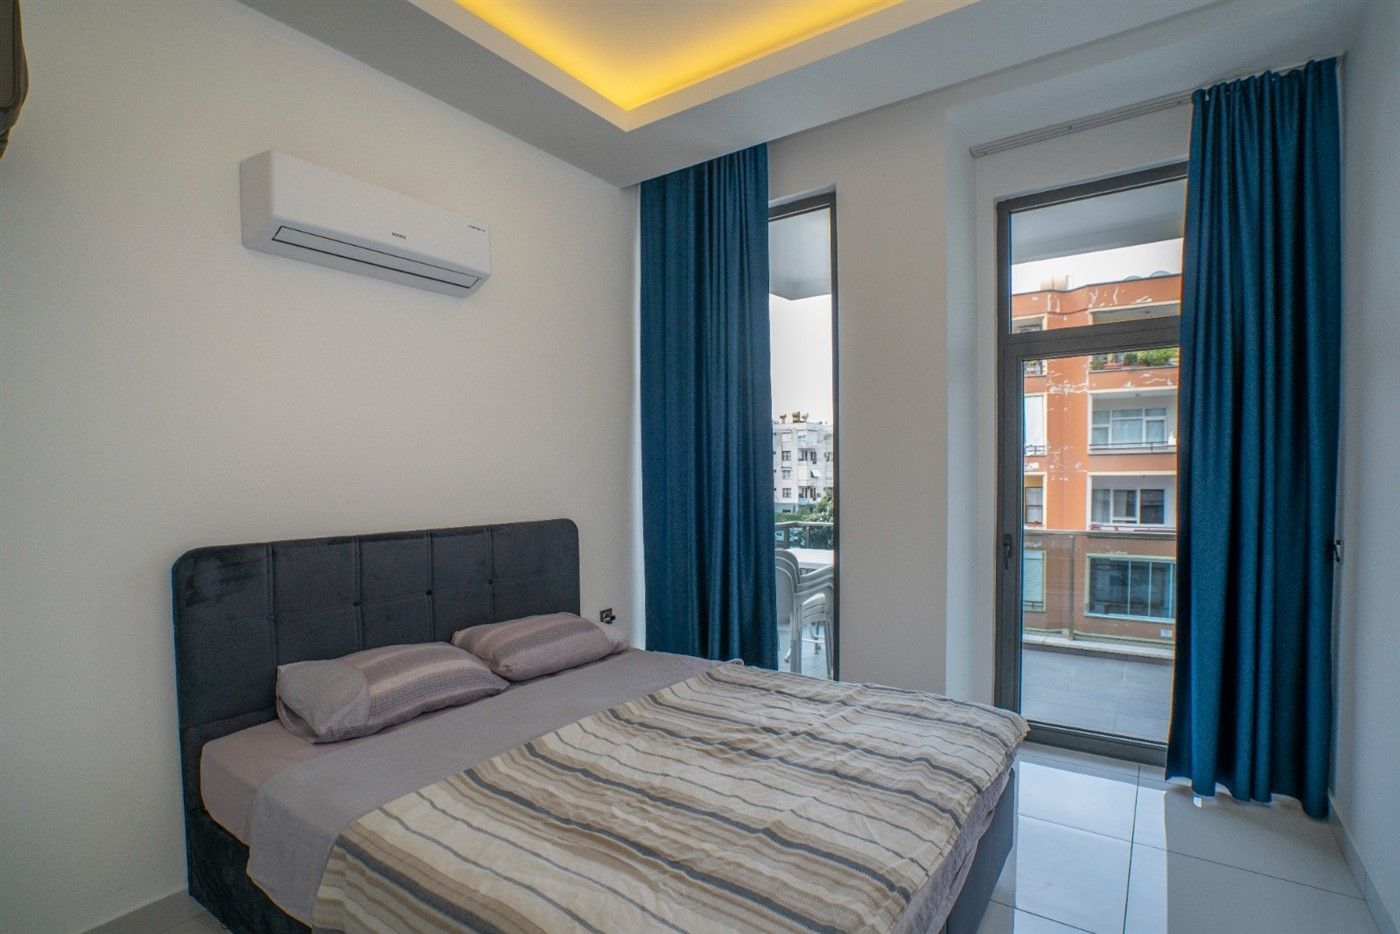 2 bedrooms apartment in the center of Alanya